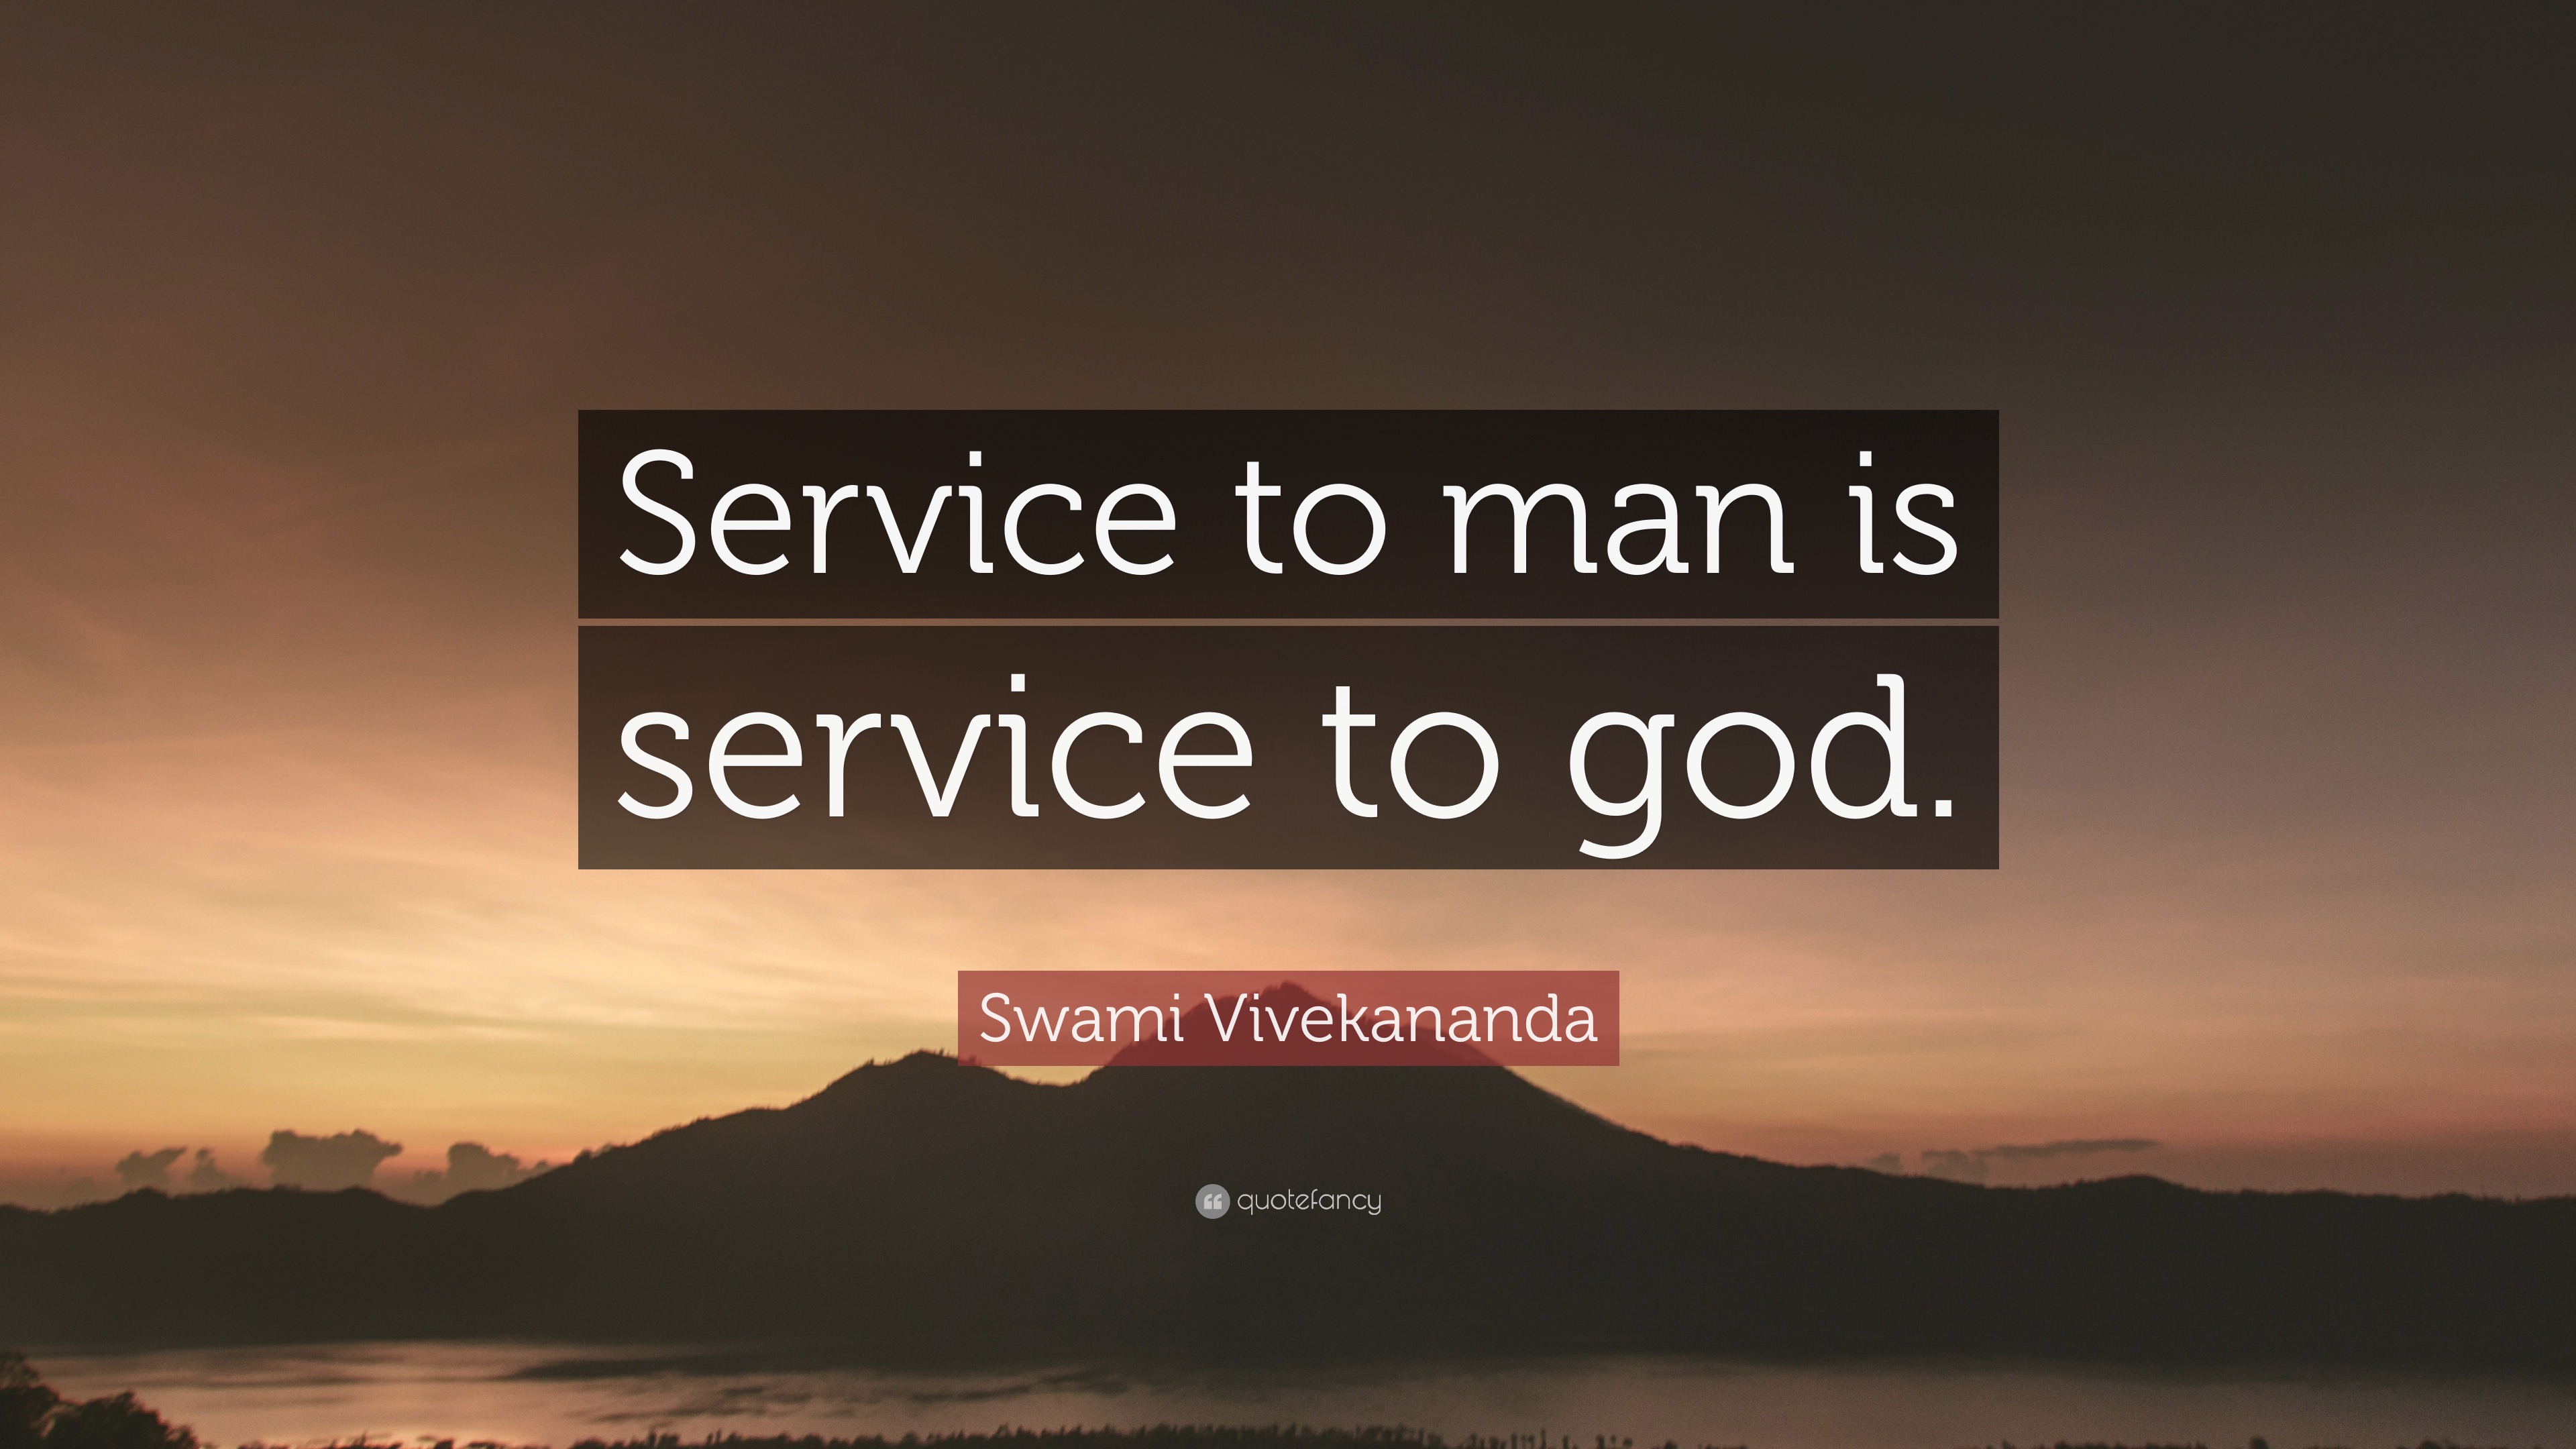 Service to man is service to god.